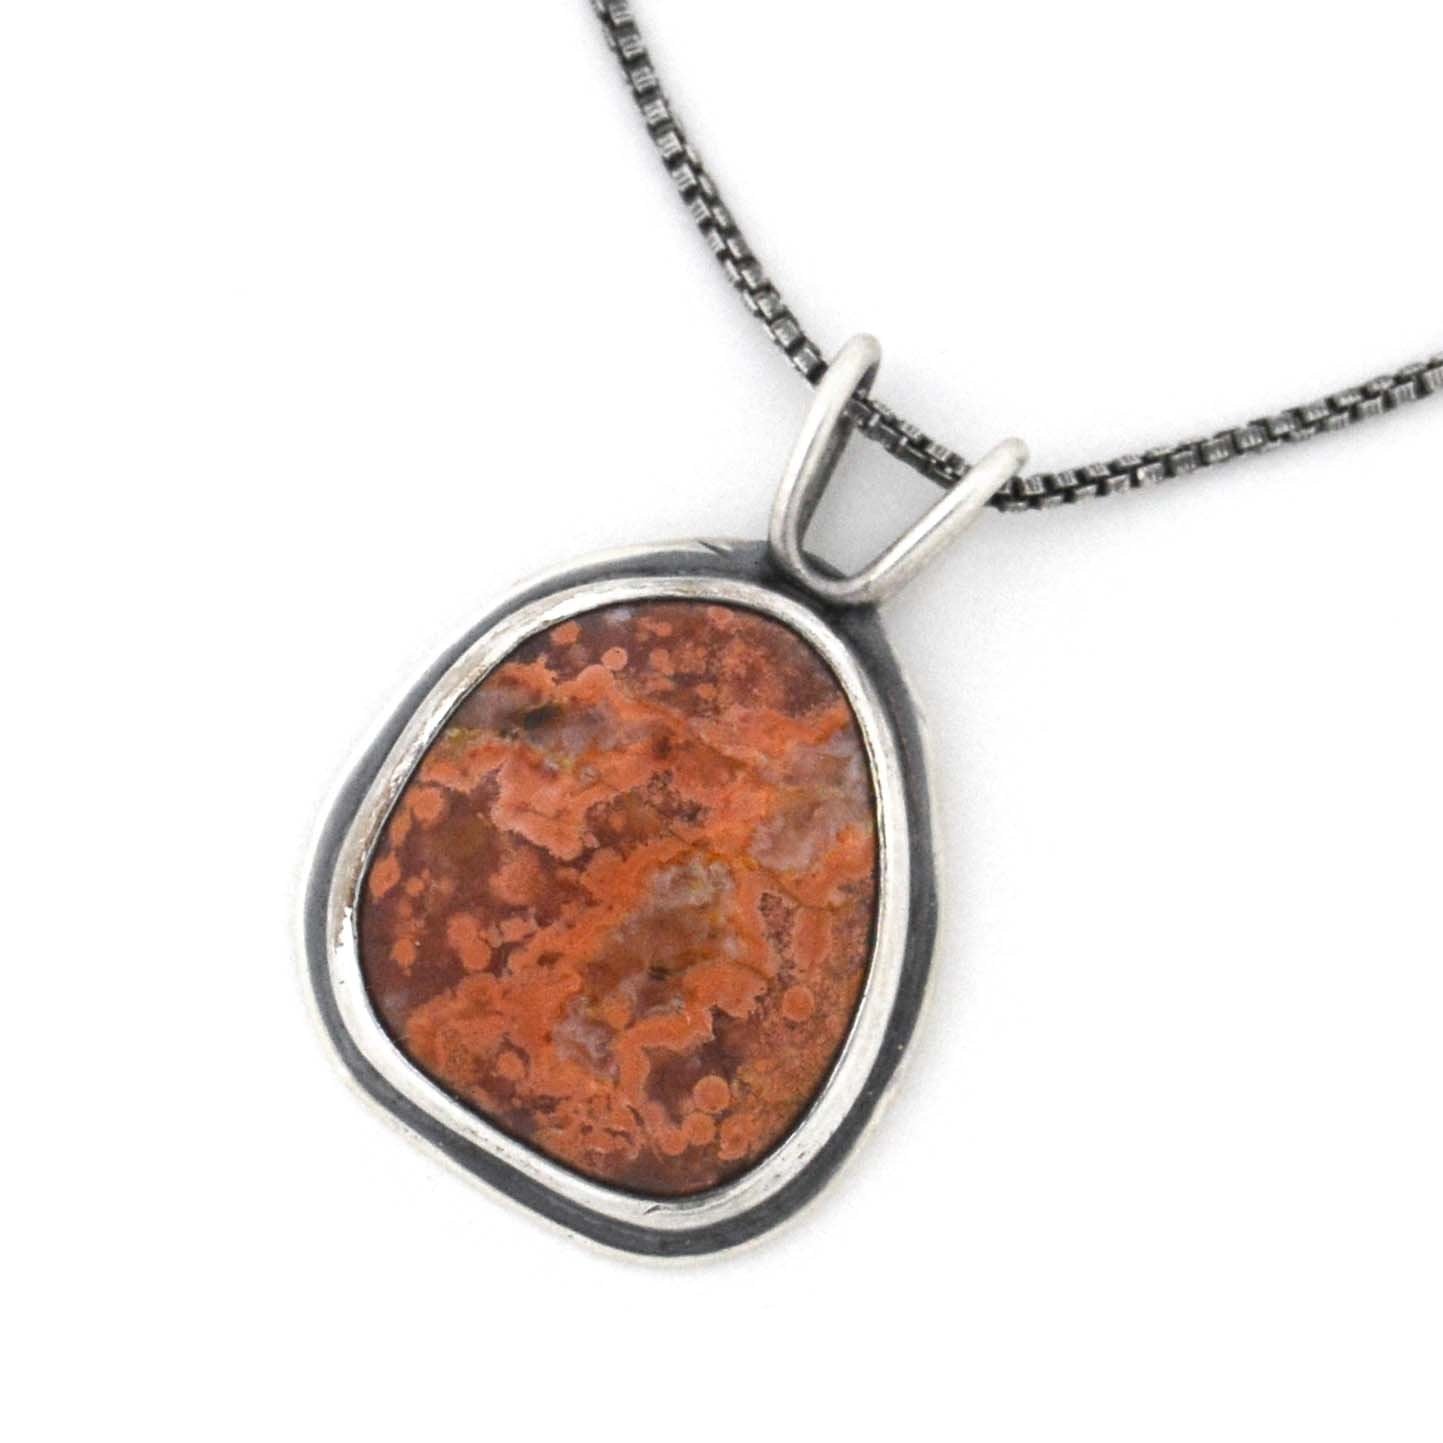 Marquette Lake Superior Agate Drop Pendant No. 3 - Silver Pendant   3776 - handmade by Beth Millner Jewelry